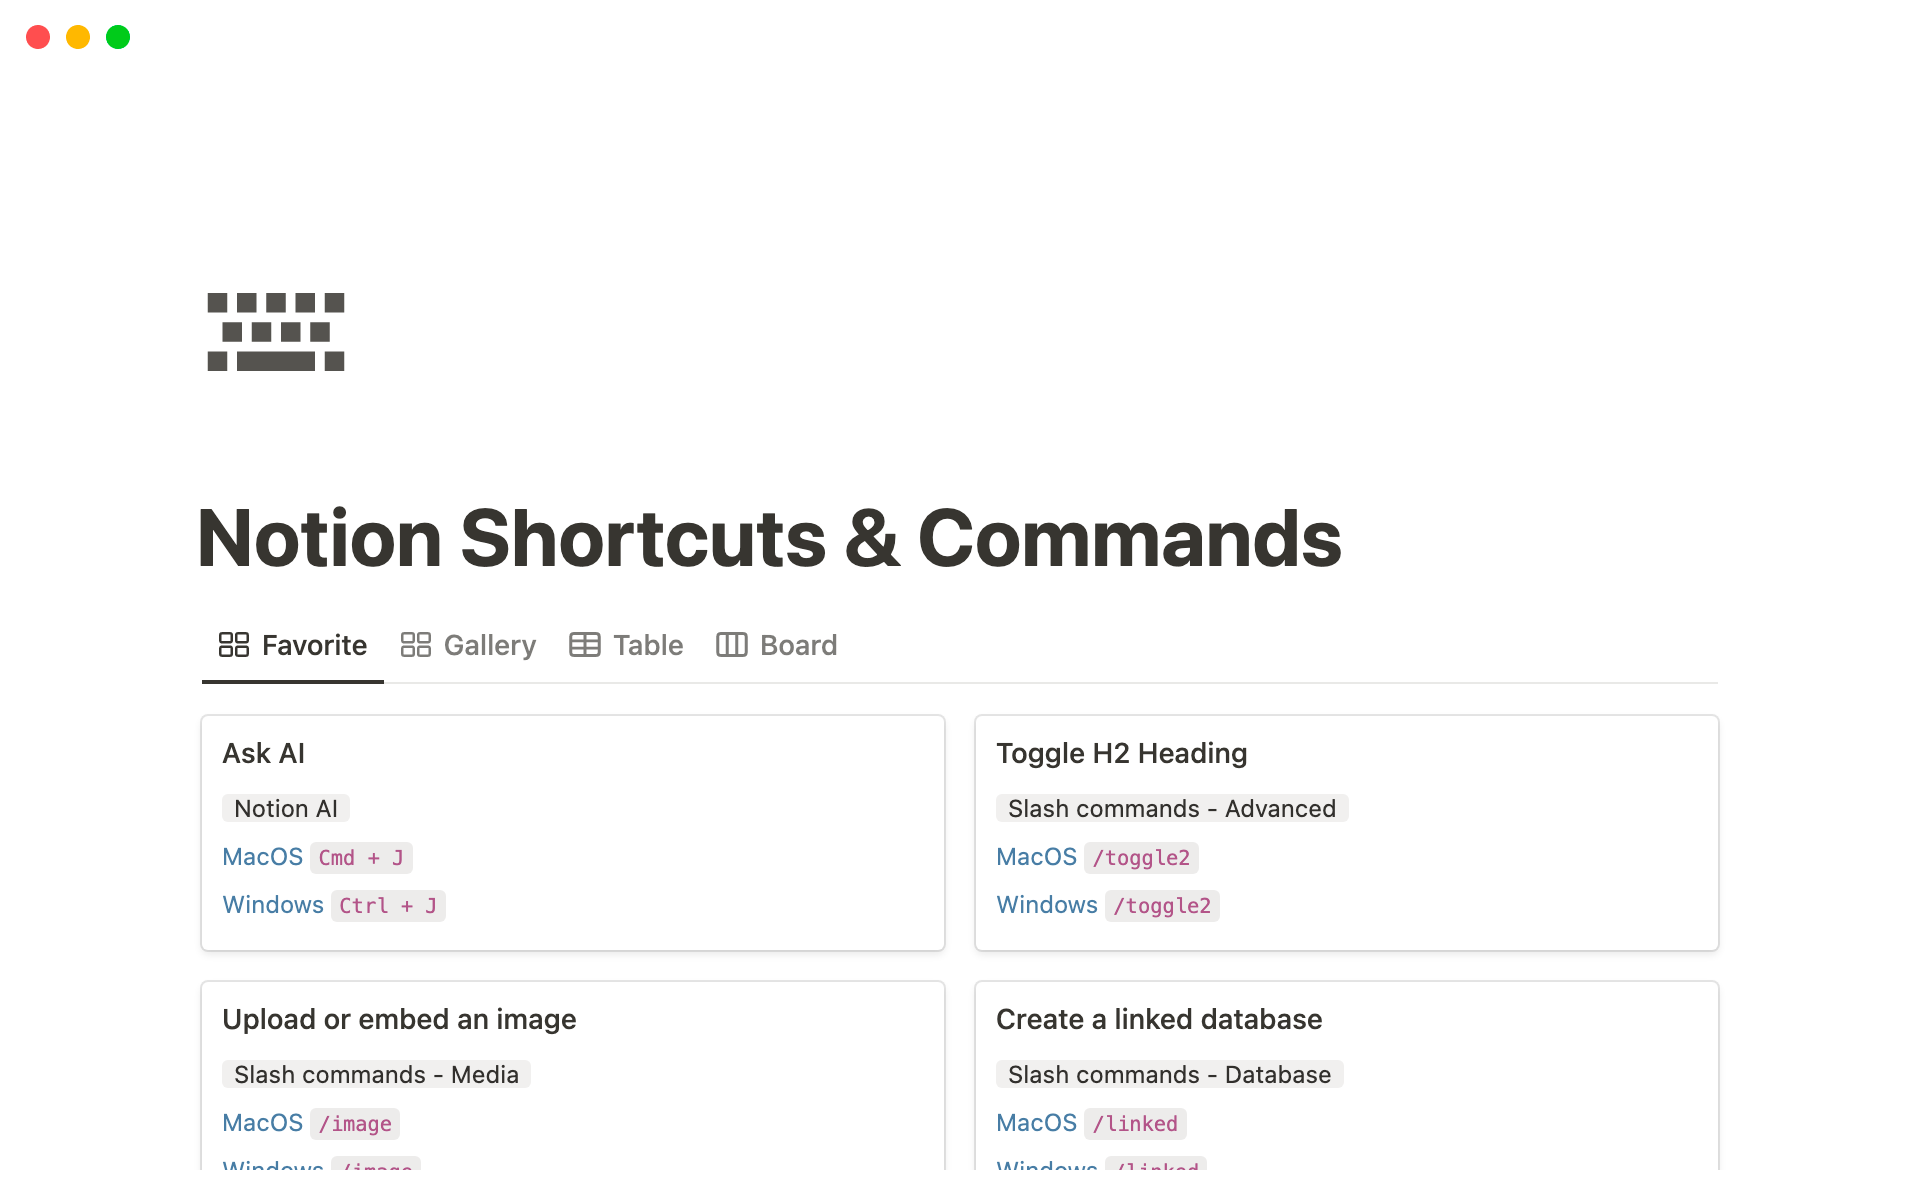 This template contains over 150 keyboard shortcuts organized by category to make using Notion faster and easier.